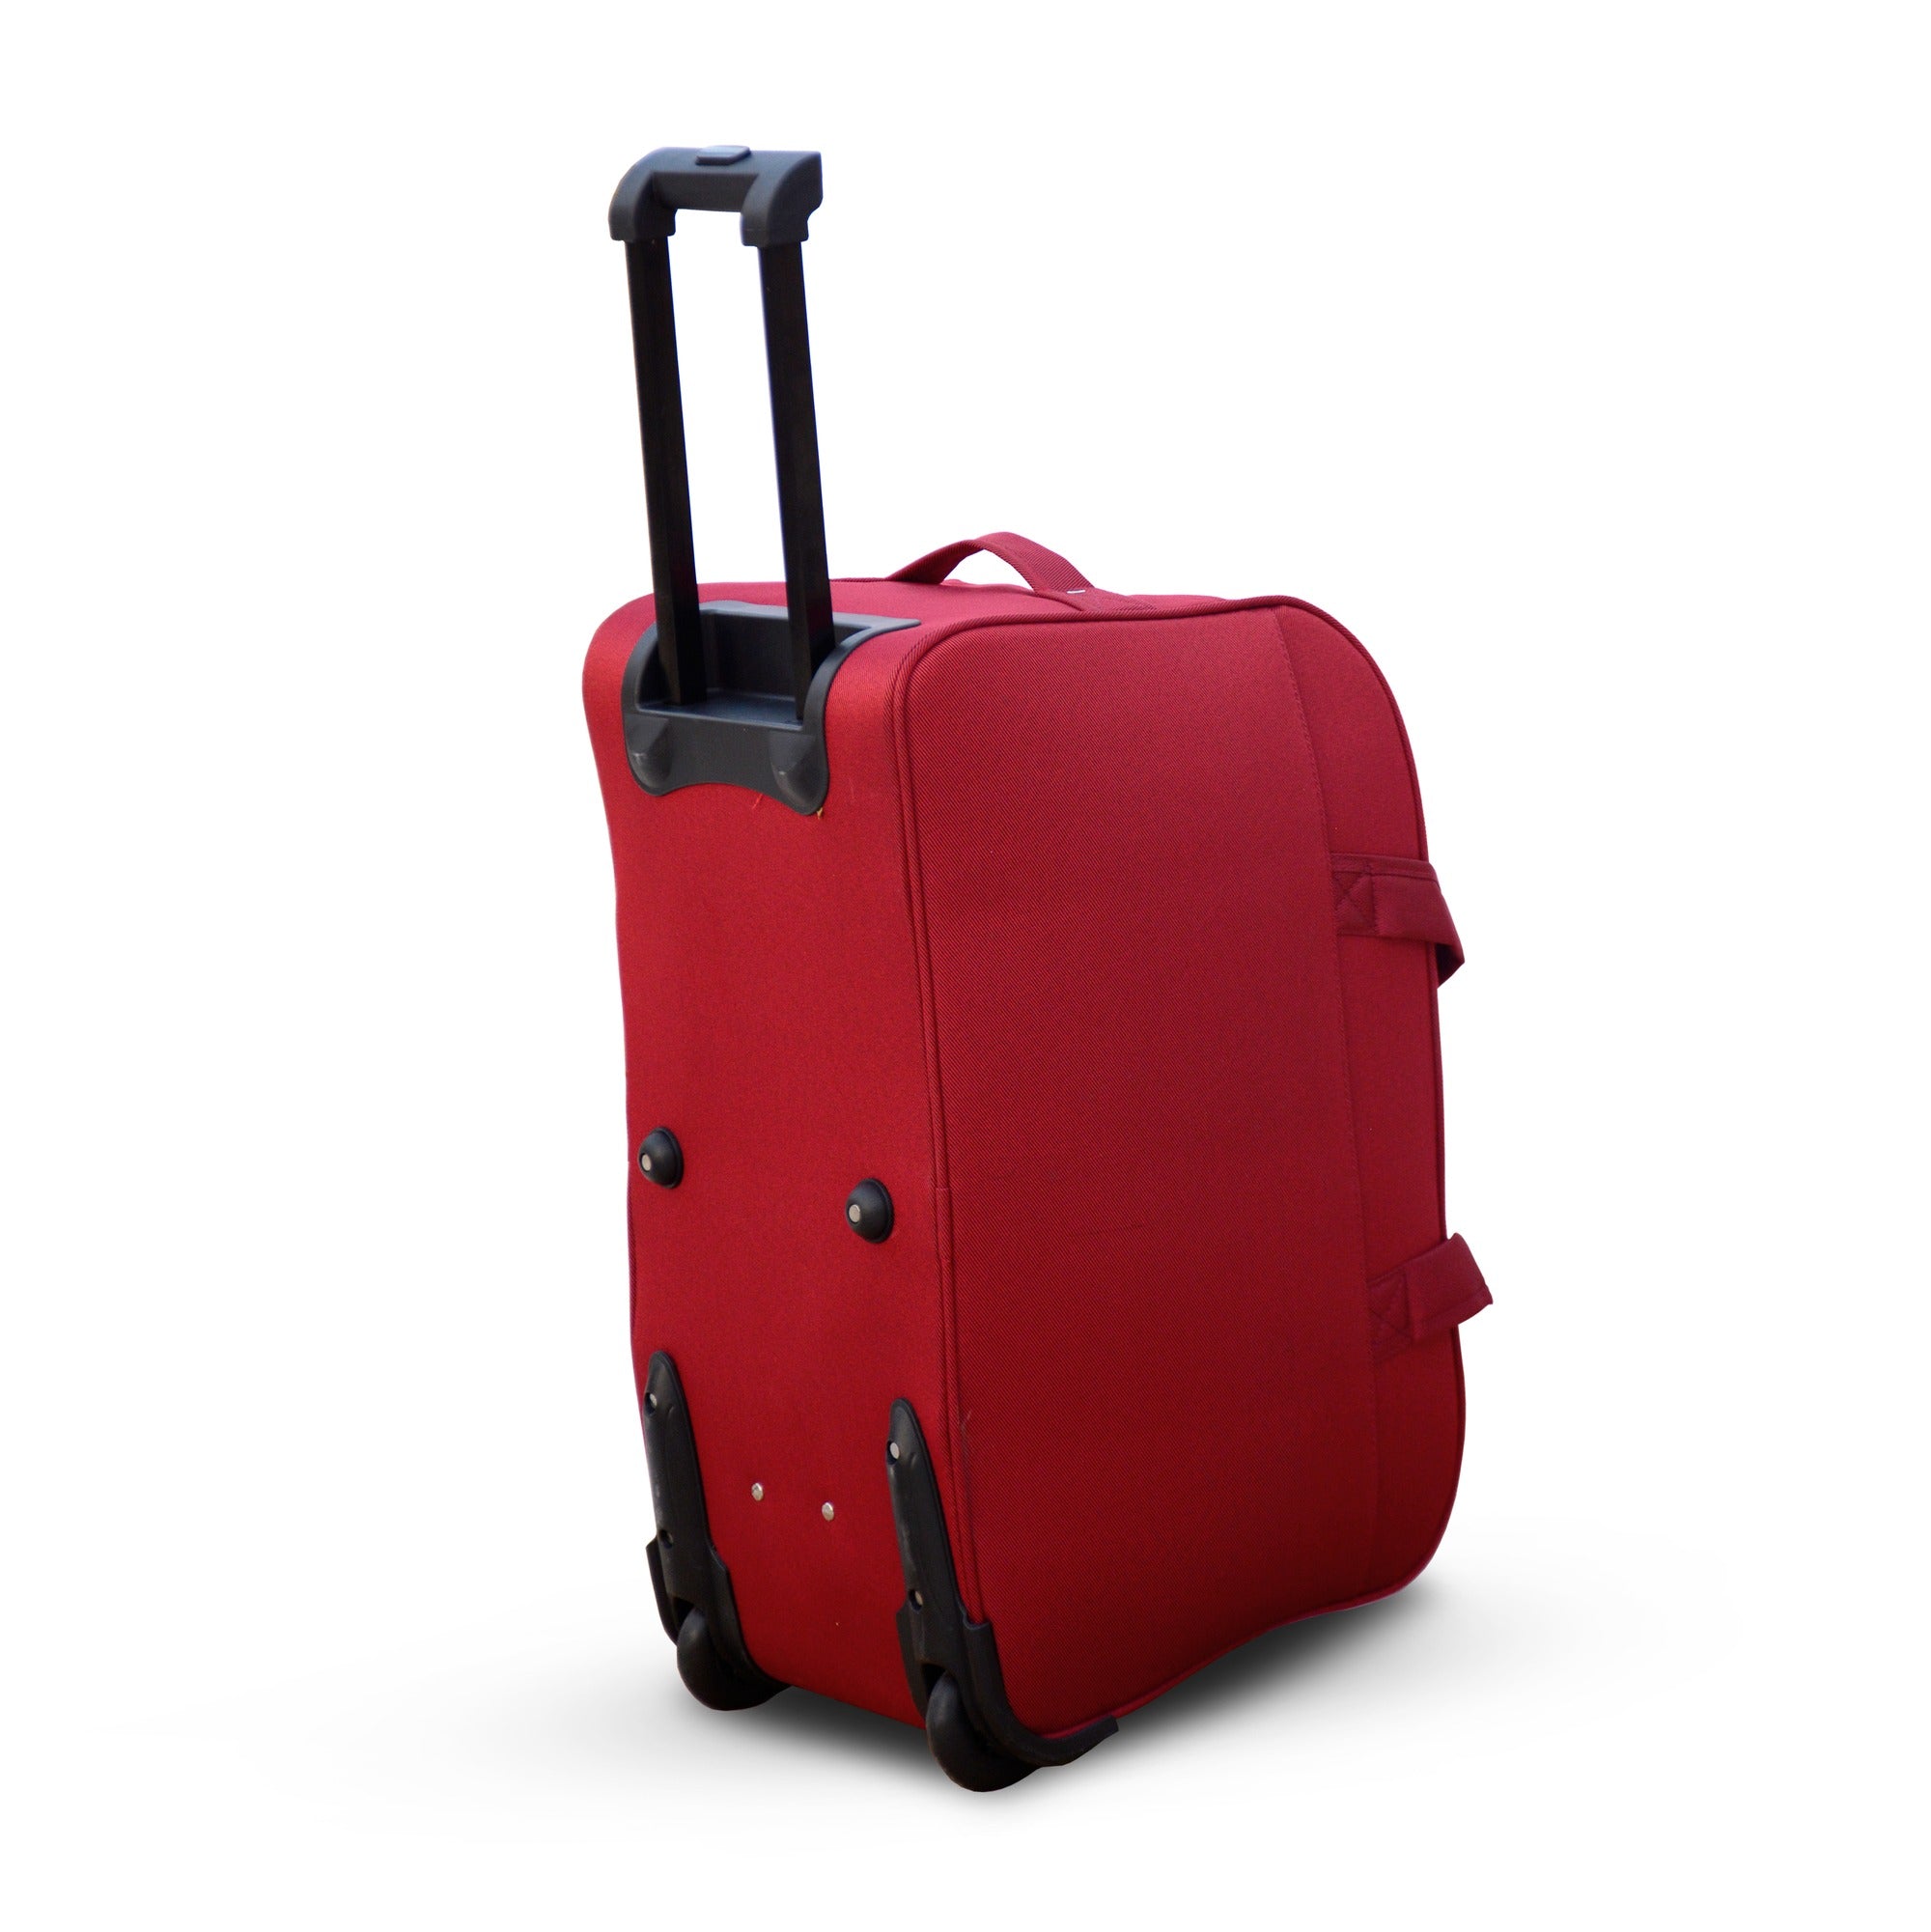 Wheeled Red Material Duffel Bag | Carry On Travel Bag with Wheel